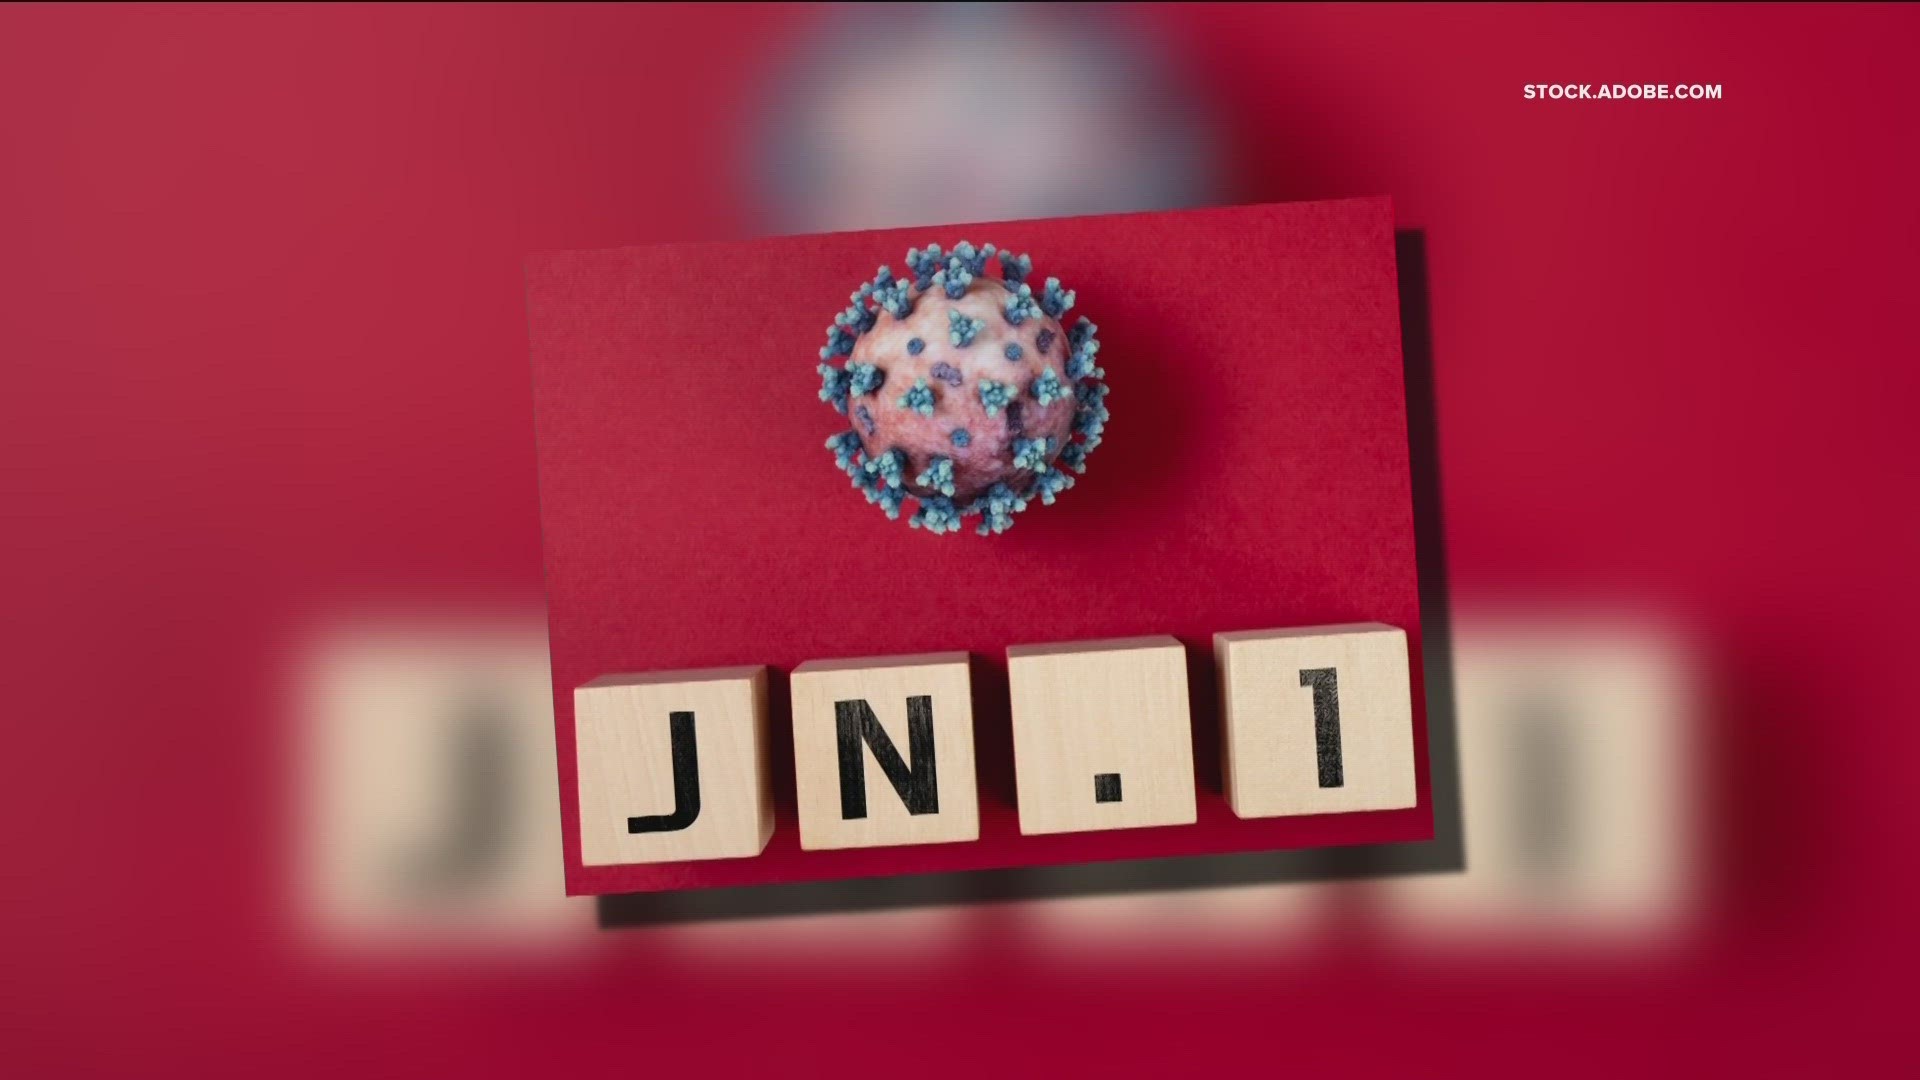 The Centers for Disease Control and Prevention estimates the new coronavirus subvariant JN.1 is causing about 20% of new infections in the U.S.